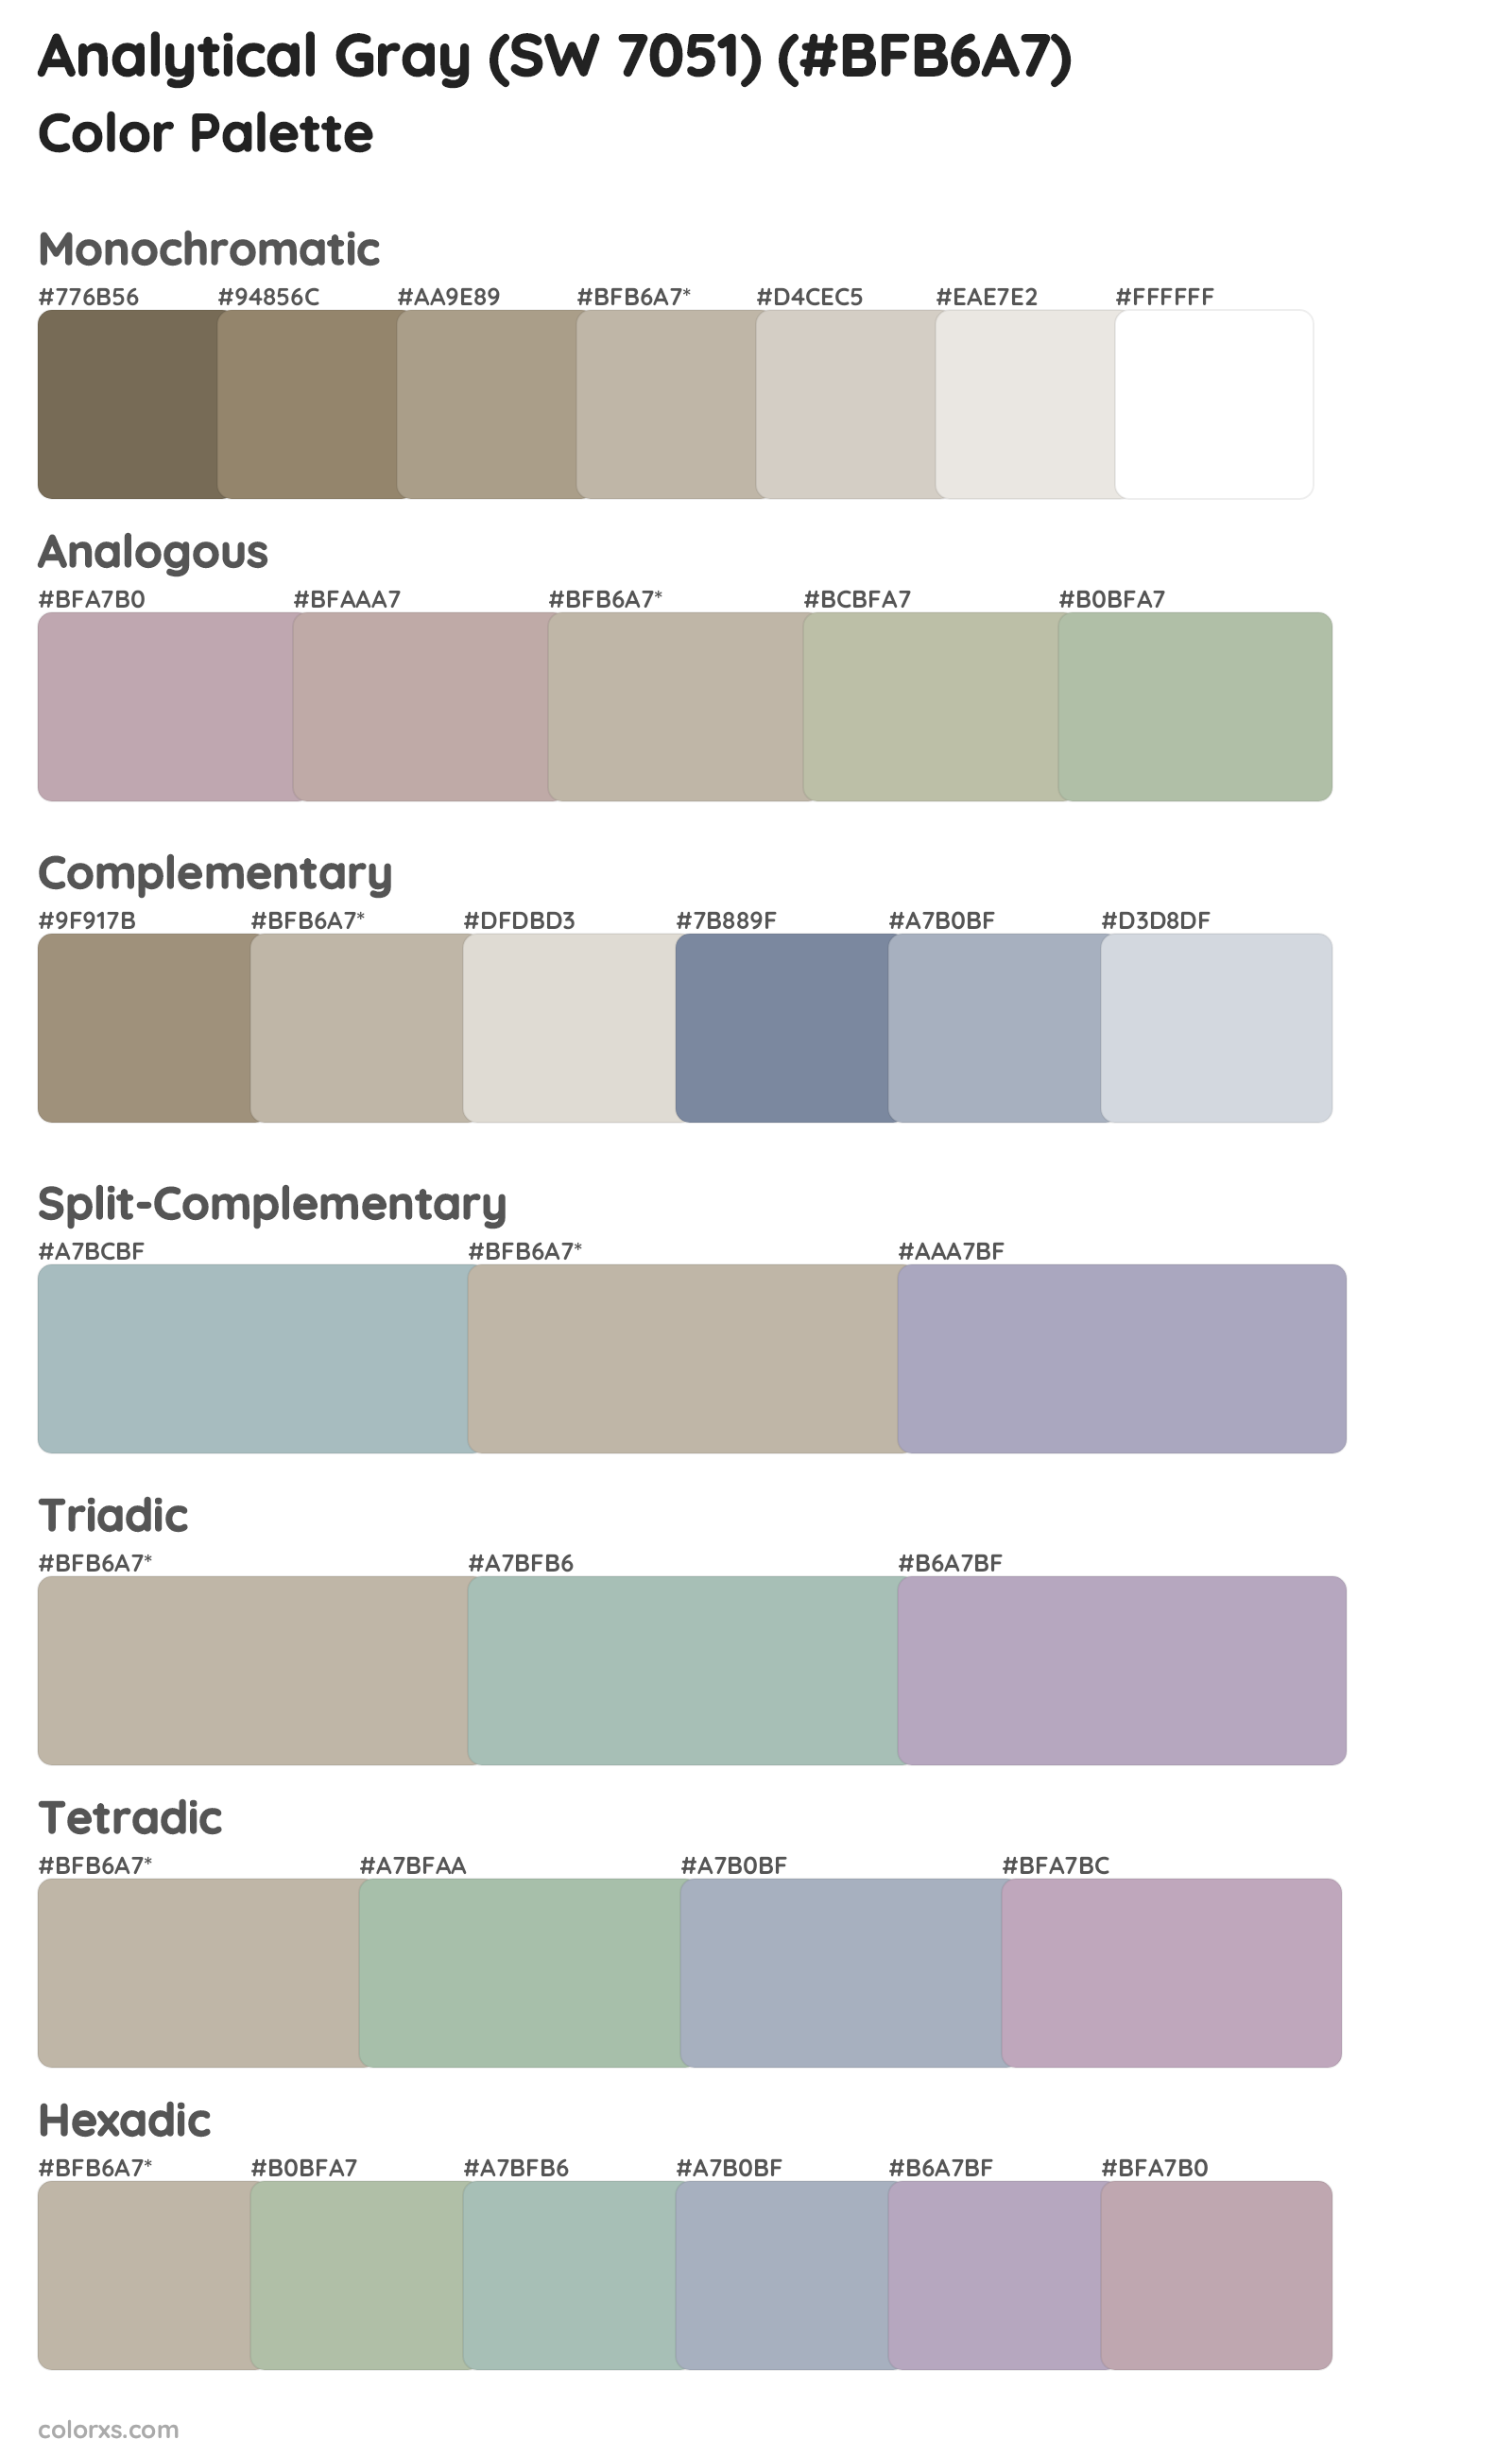 Analytical Gray (SW 7051) Color Scheme Palettes